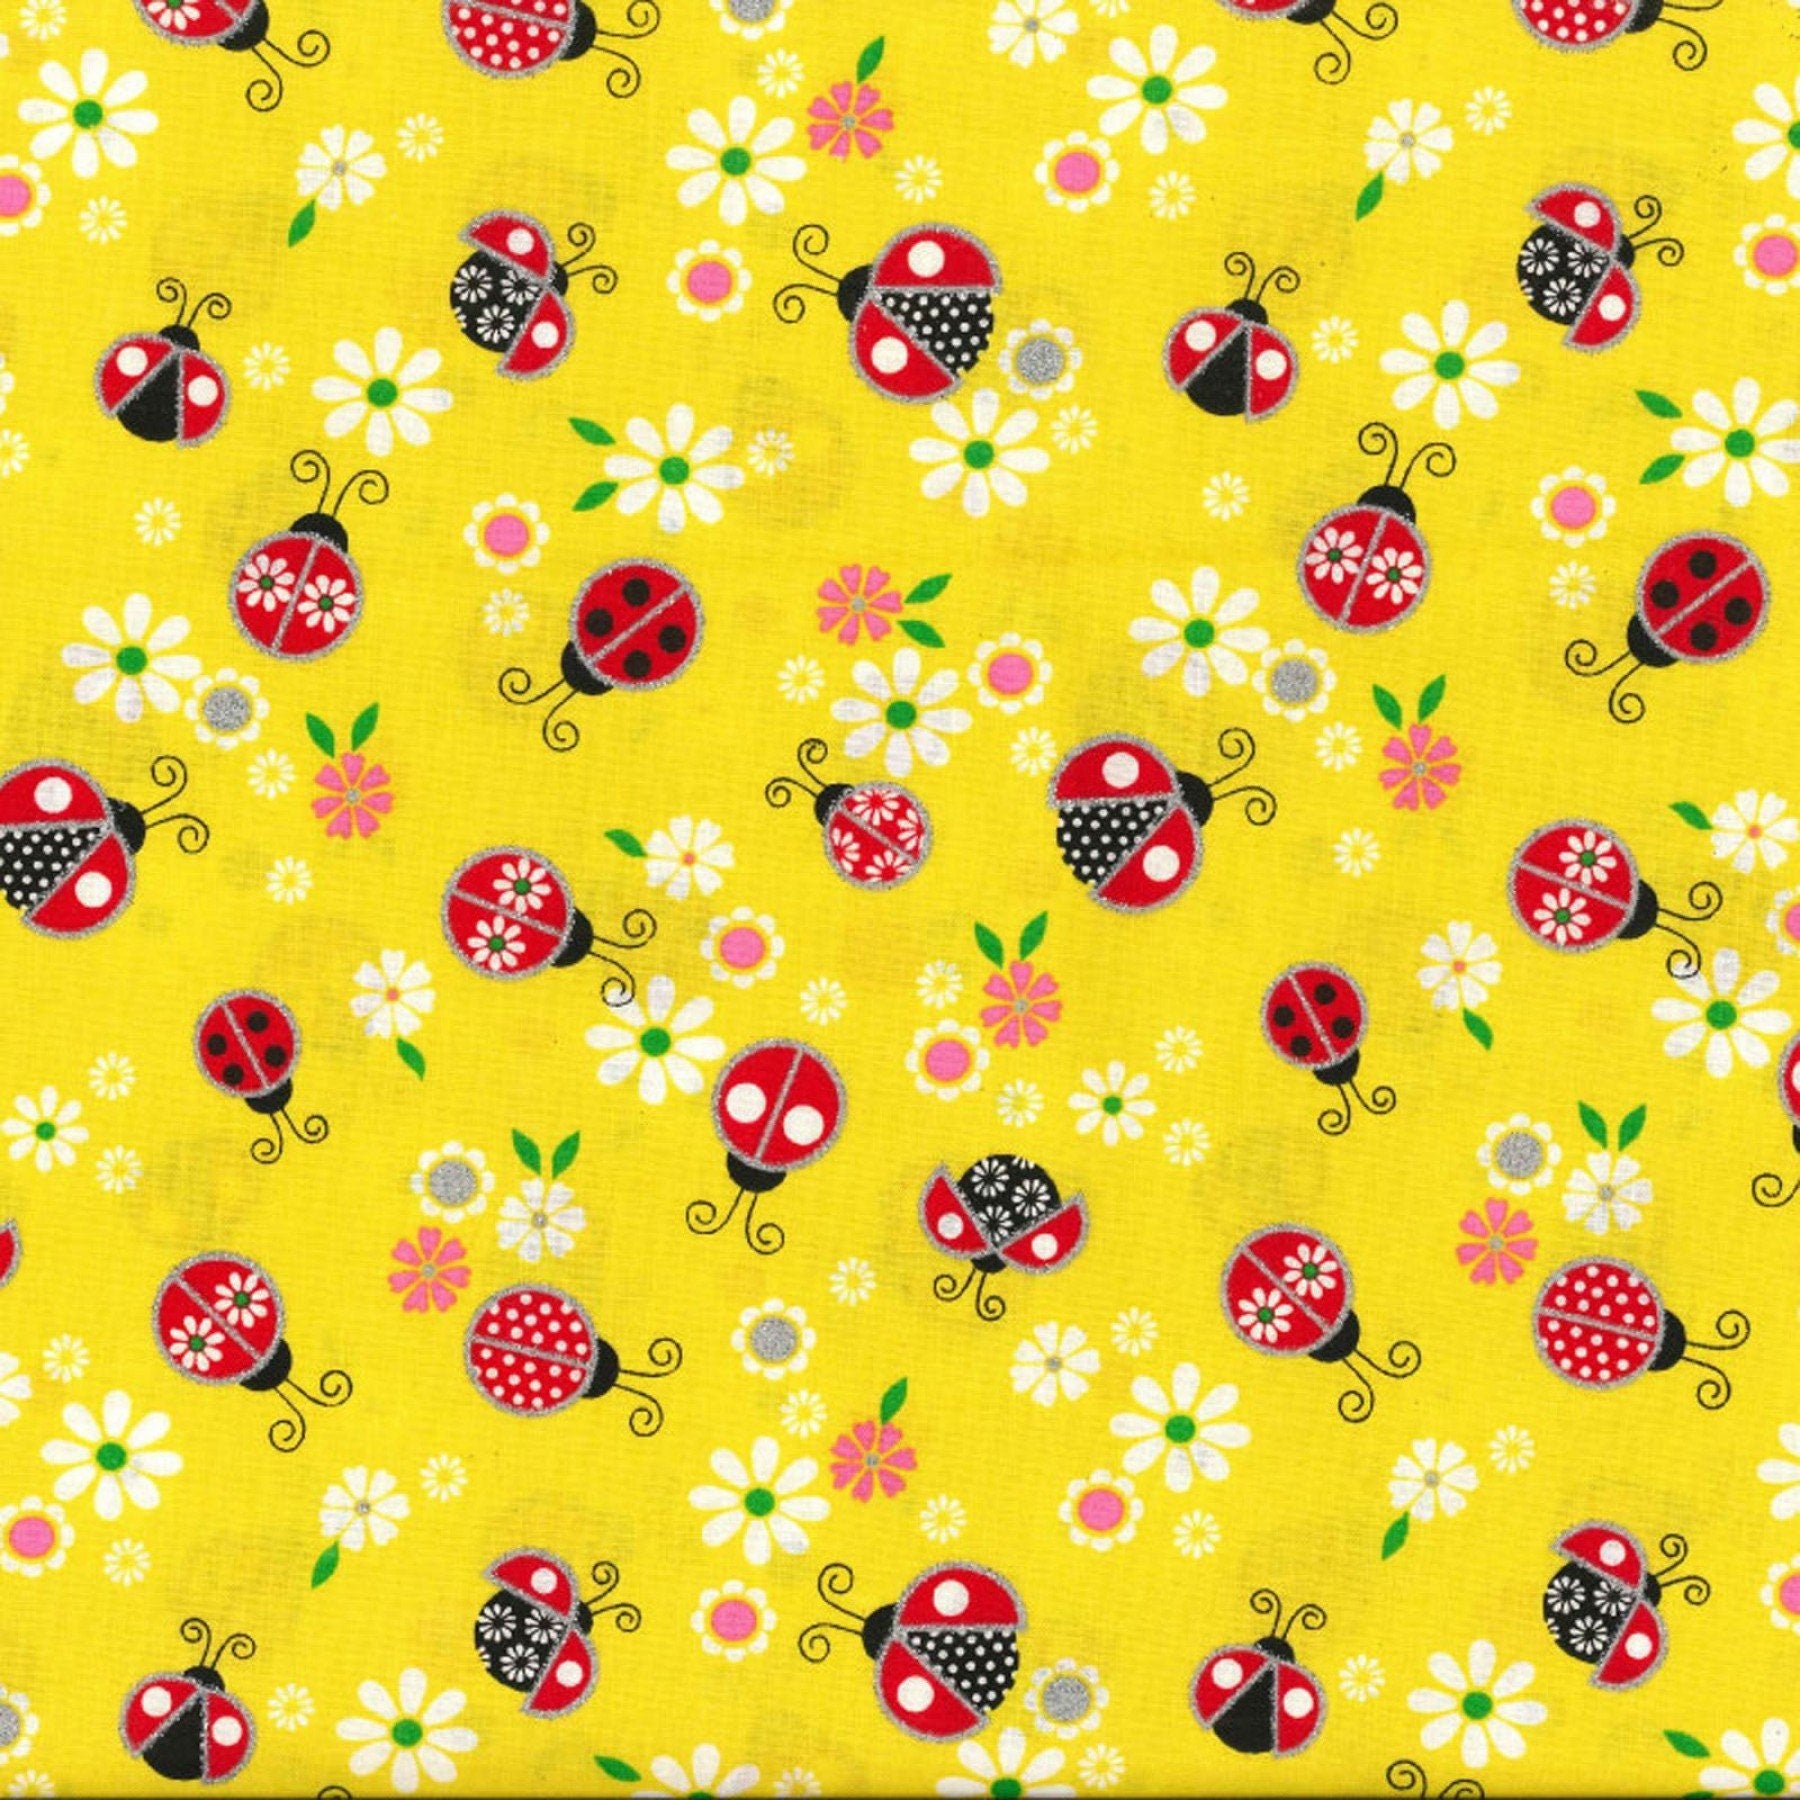 Ladybug Floral 3 yard quilt kit. One yard of each of 3 coordinating fabrics perfect for a quick and easy quilt.